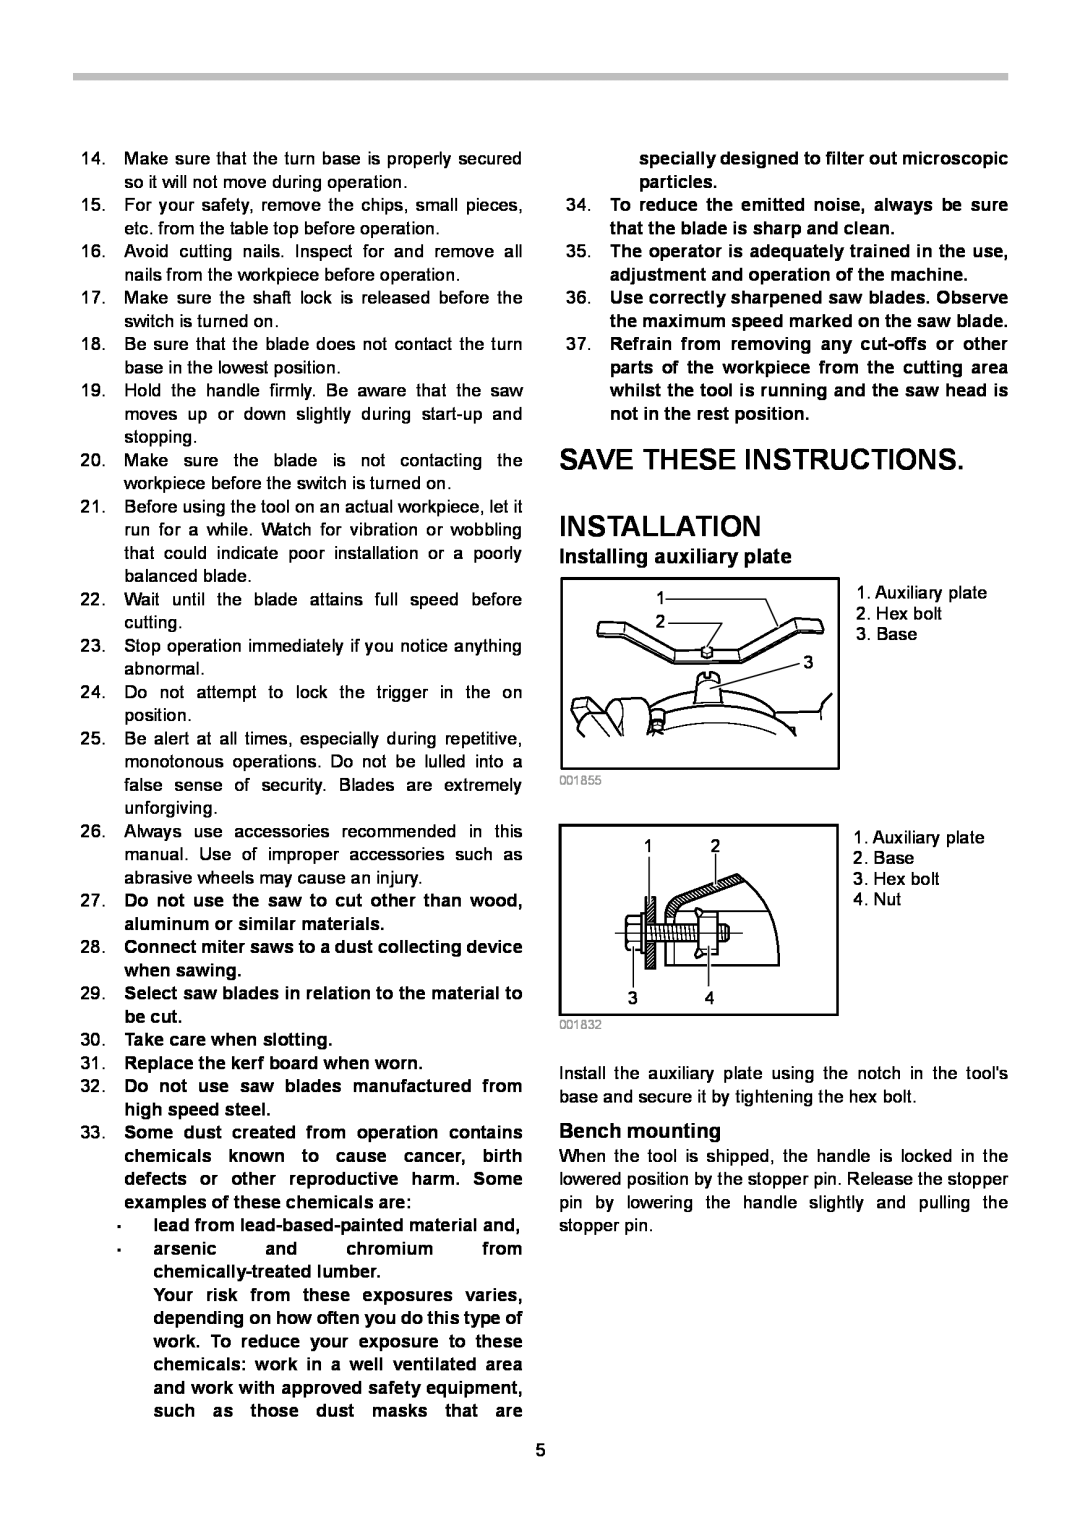 Makita LS1040S instruction manual Save These Instructions, Installation, Installing auxiliary plate, Bench mounting 